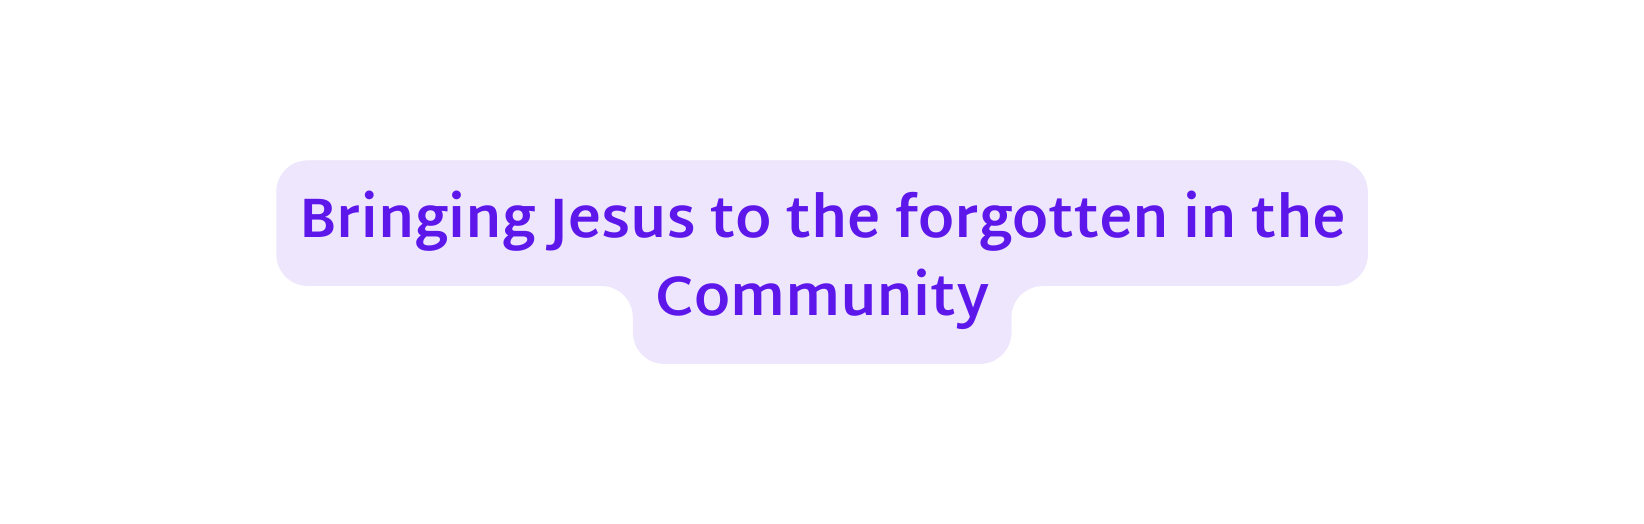 Bringing Jesus to the forgotten in the Community